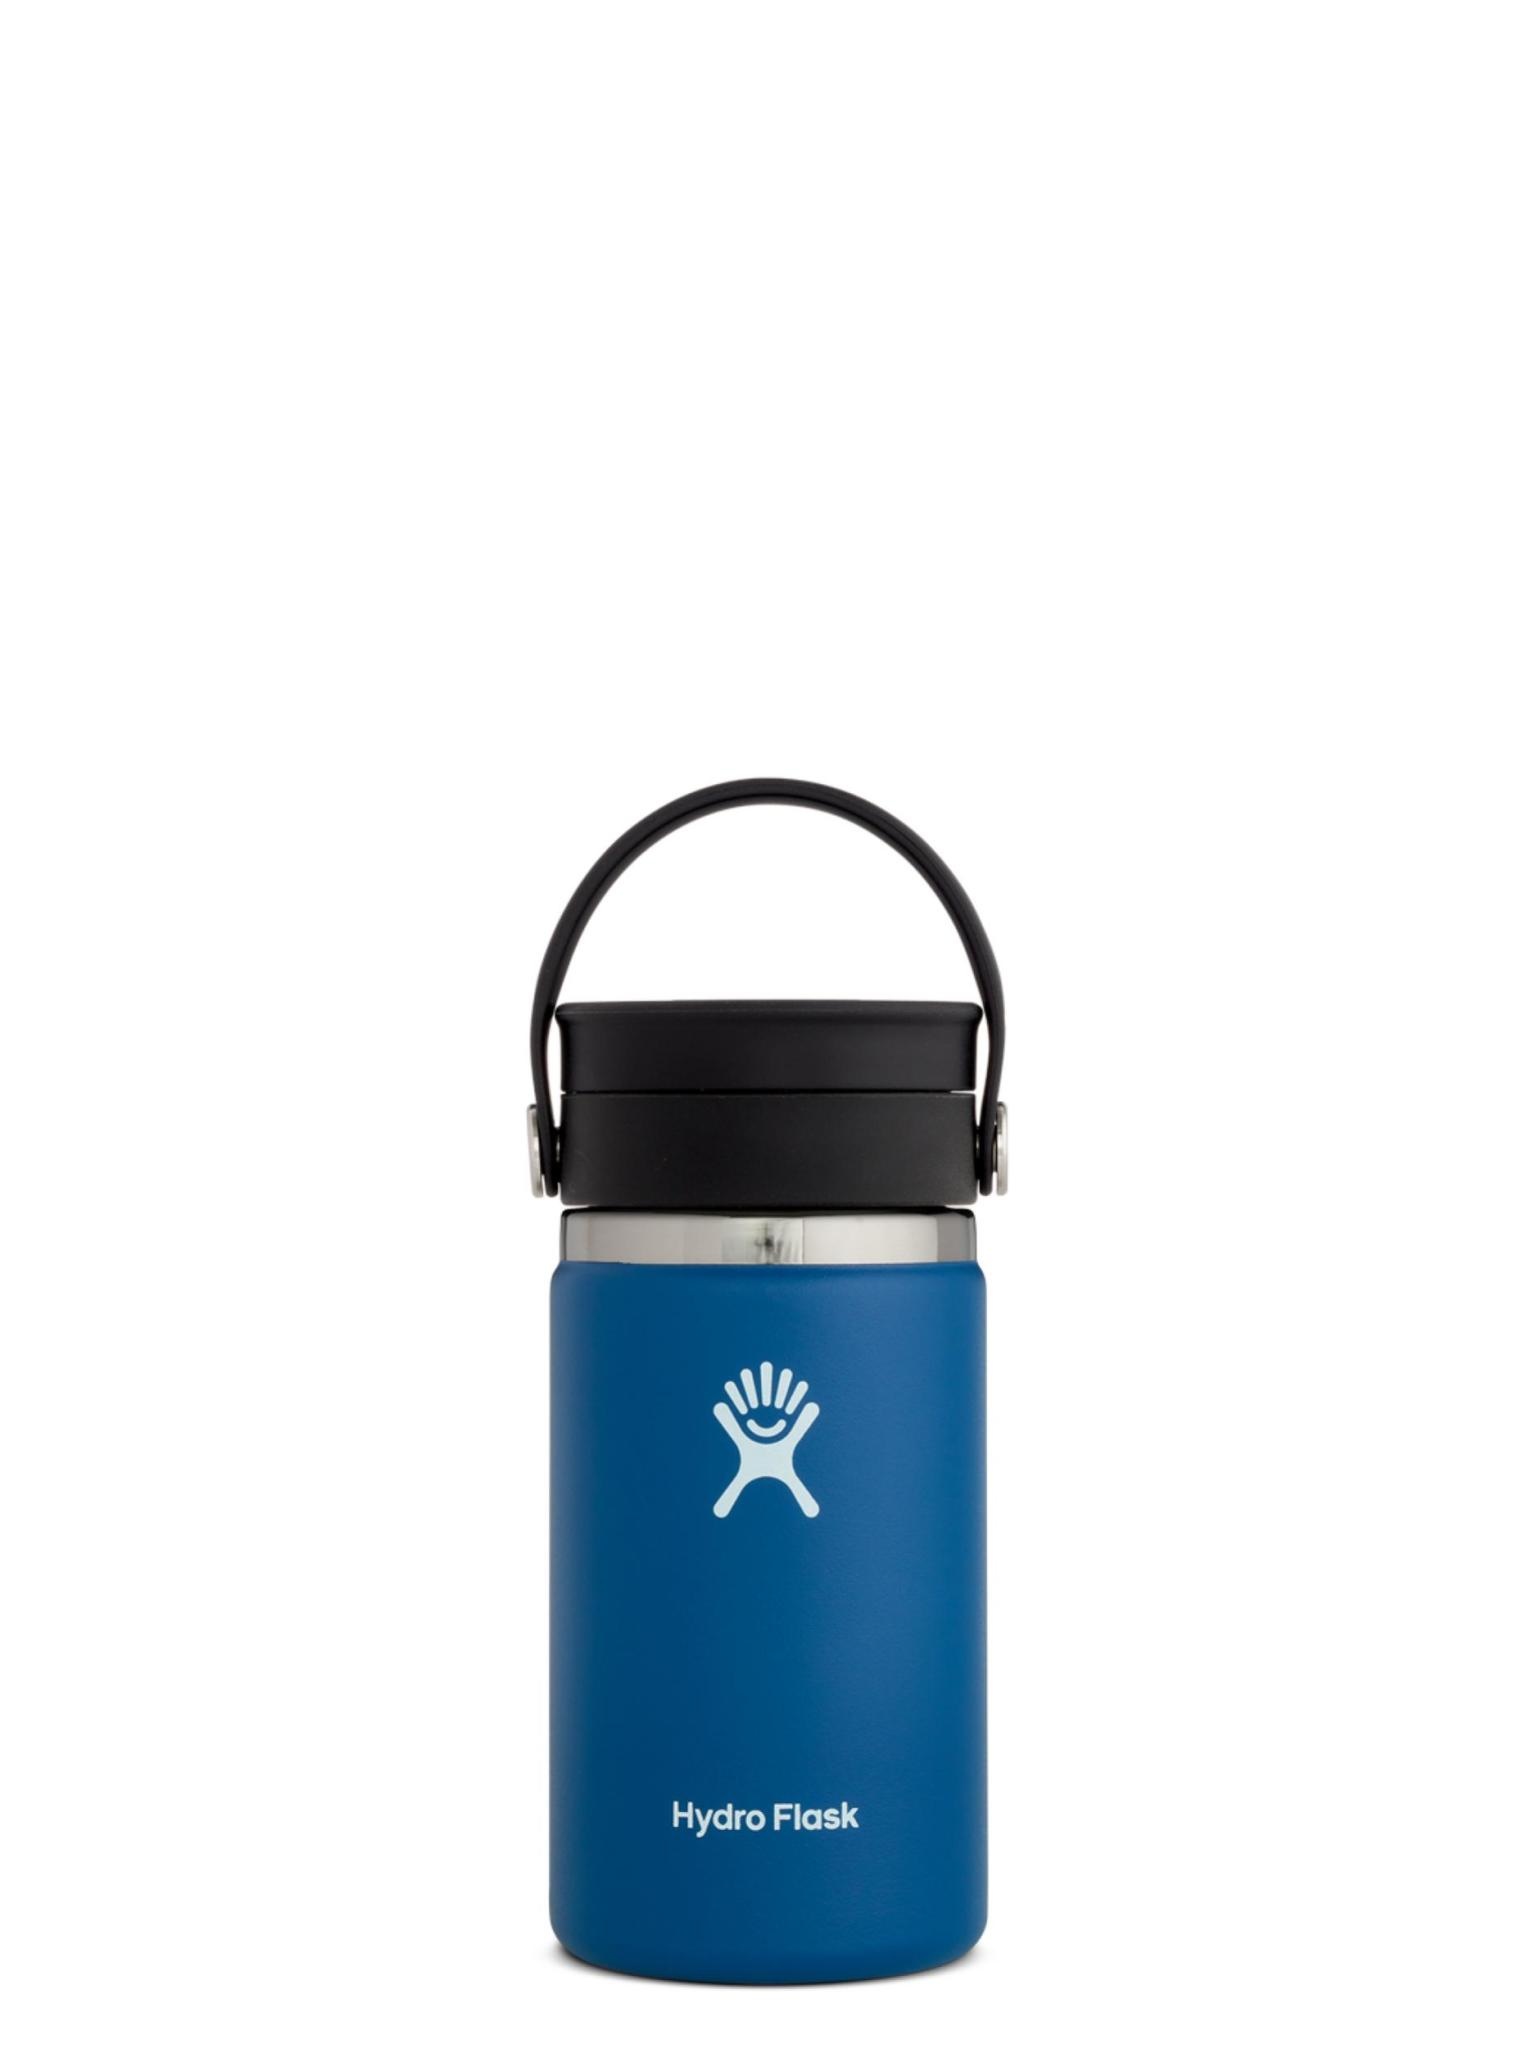 Hydro Flask 12oz Wide Mouth Coffee with Flex Sip Lid